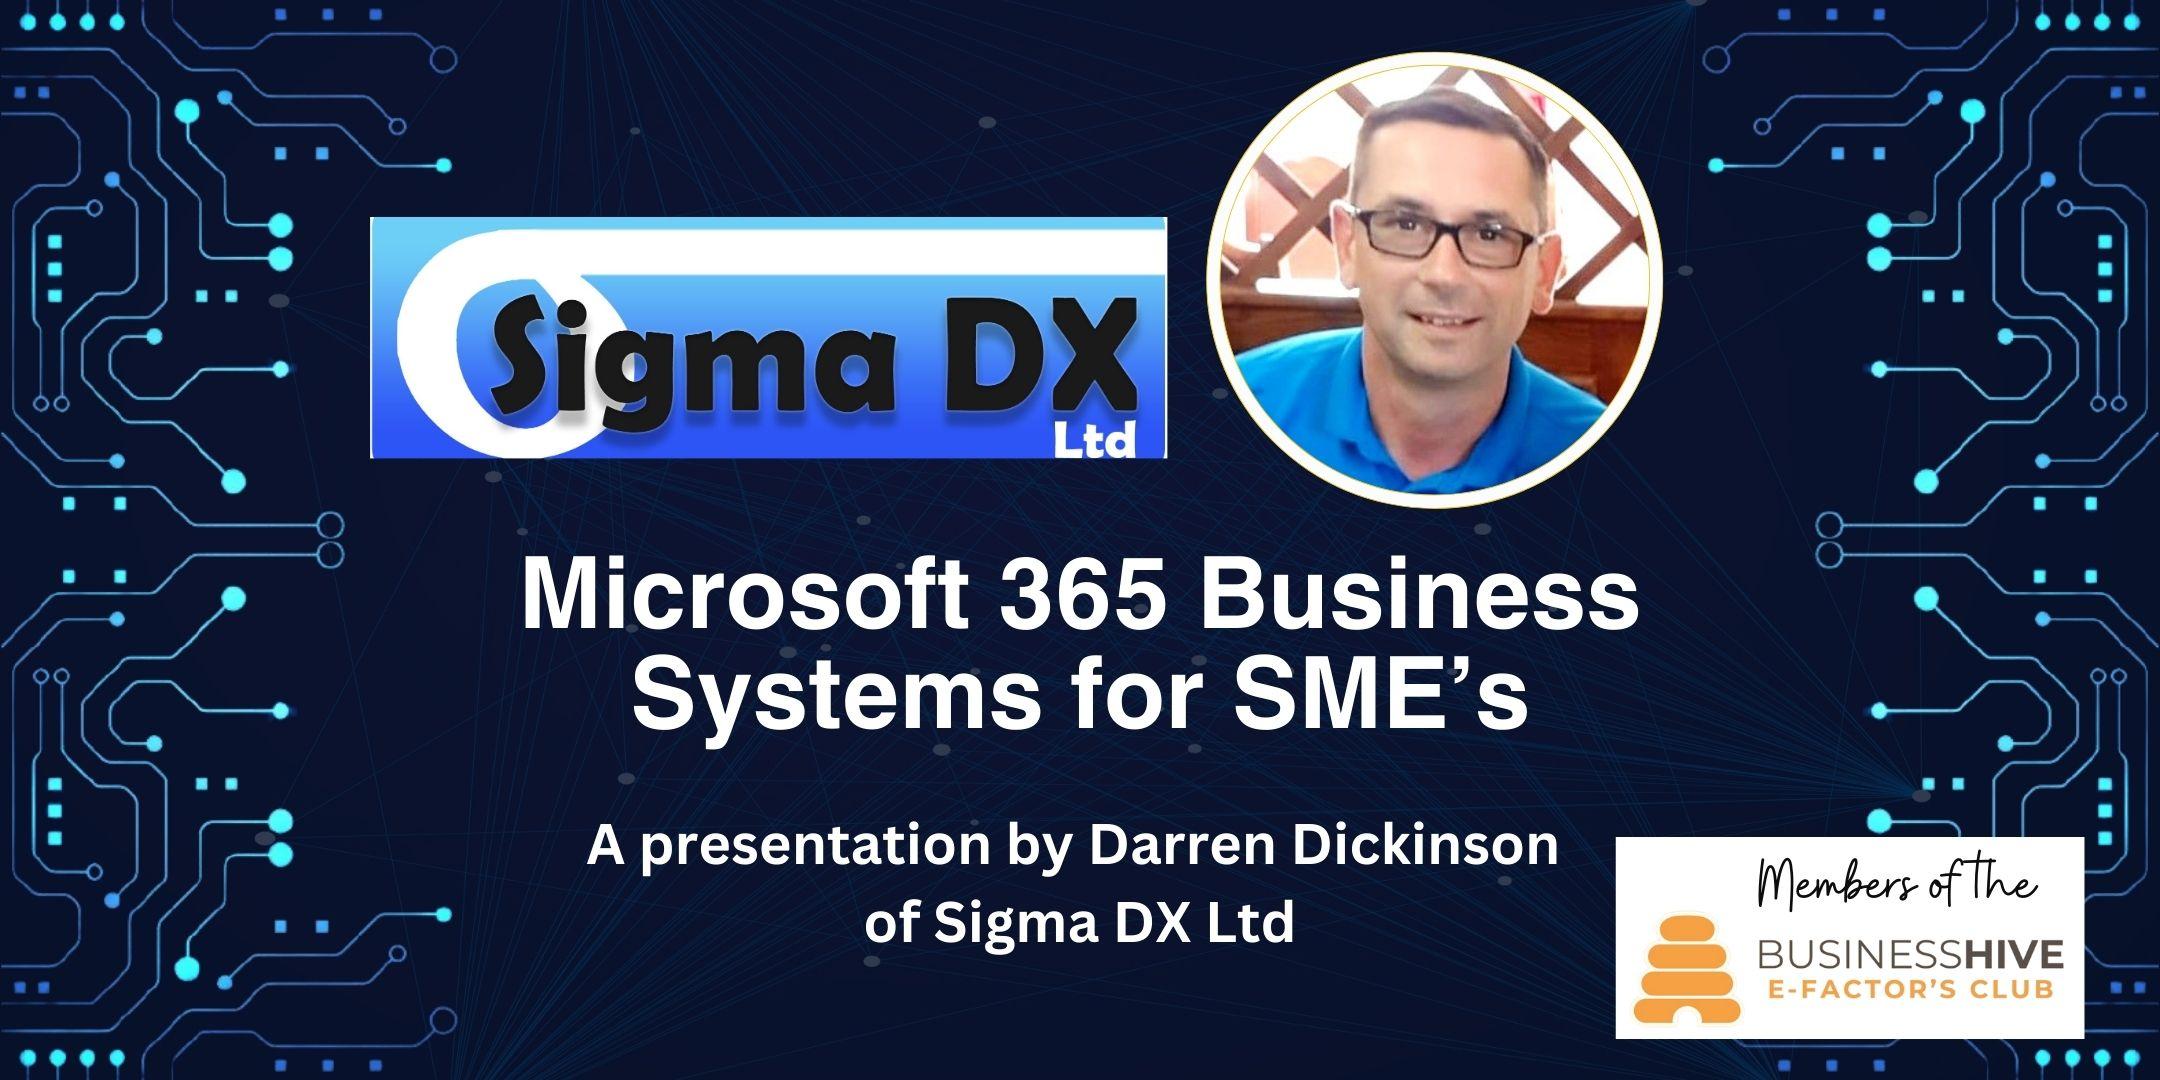 Microsoft 365 business systems for SMEs.